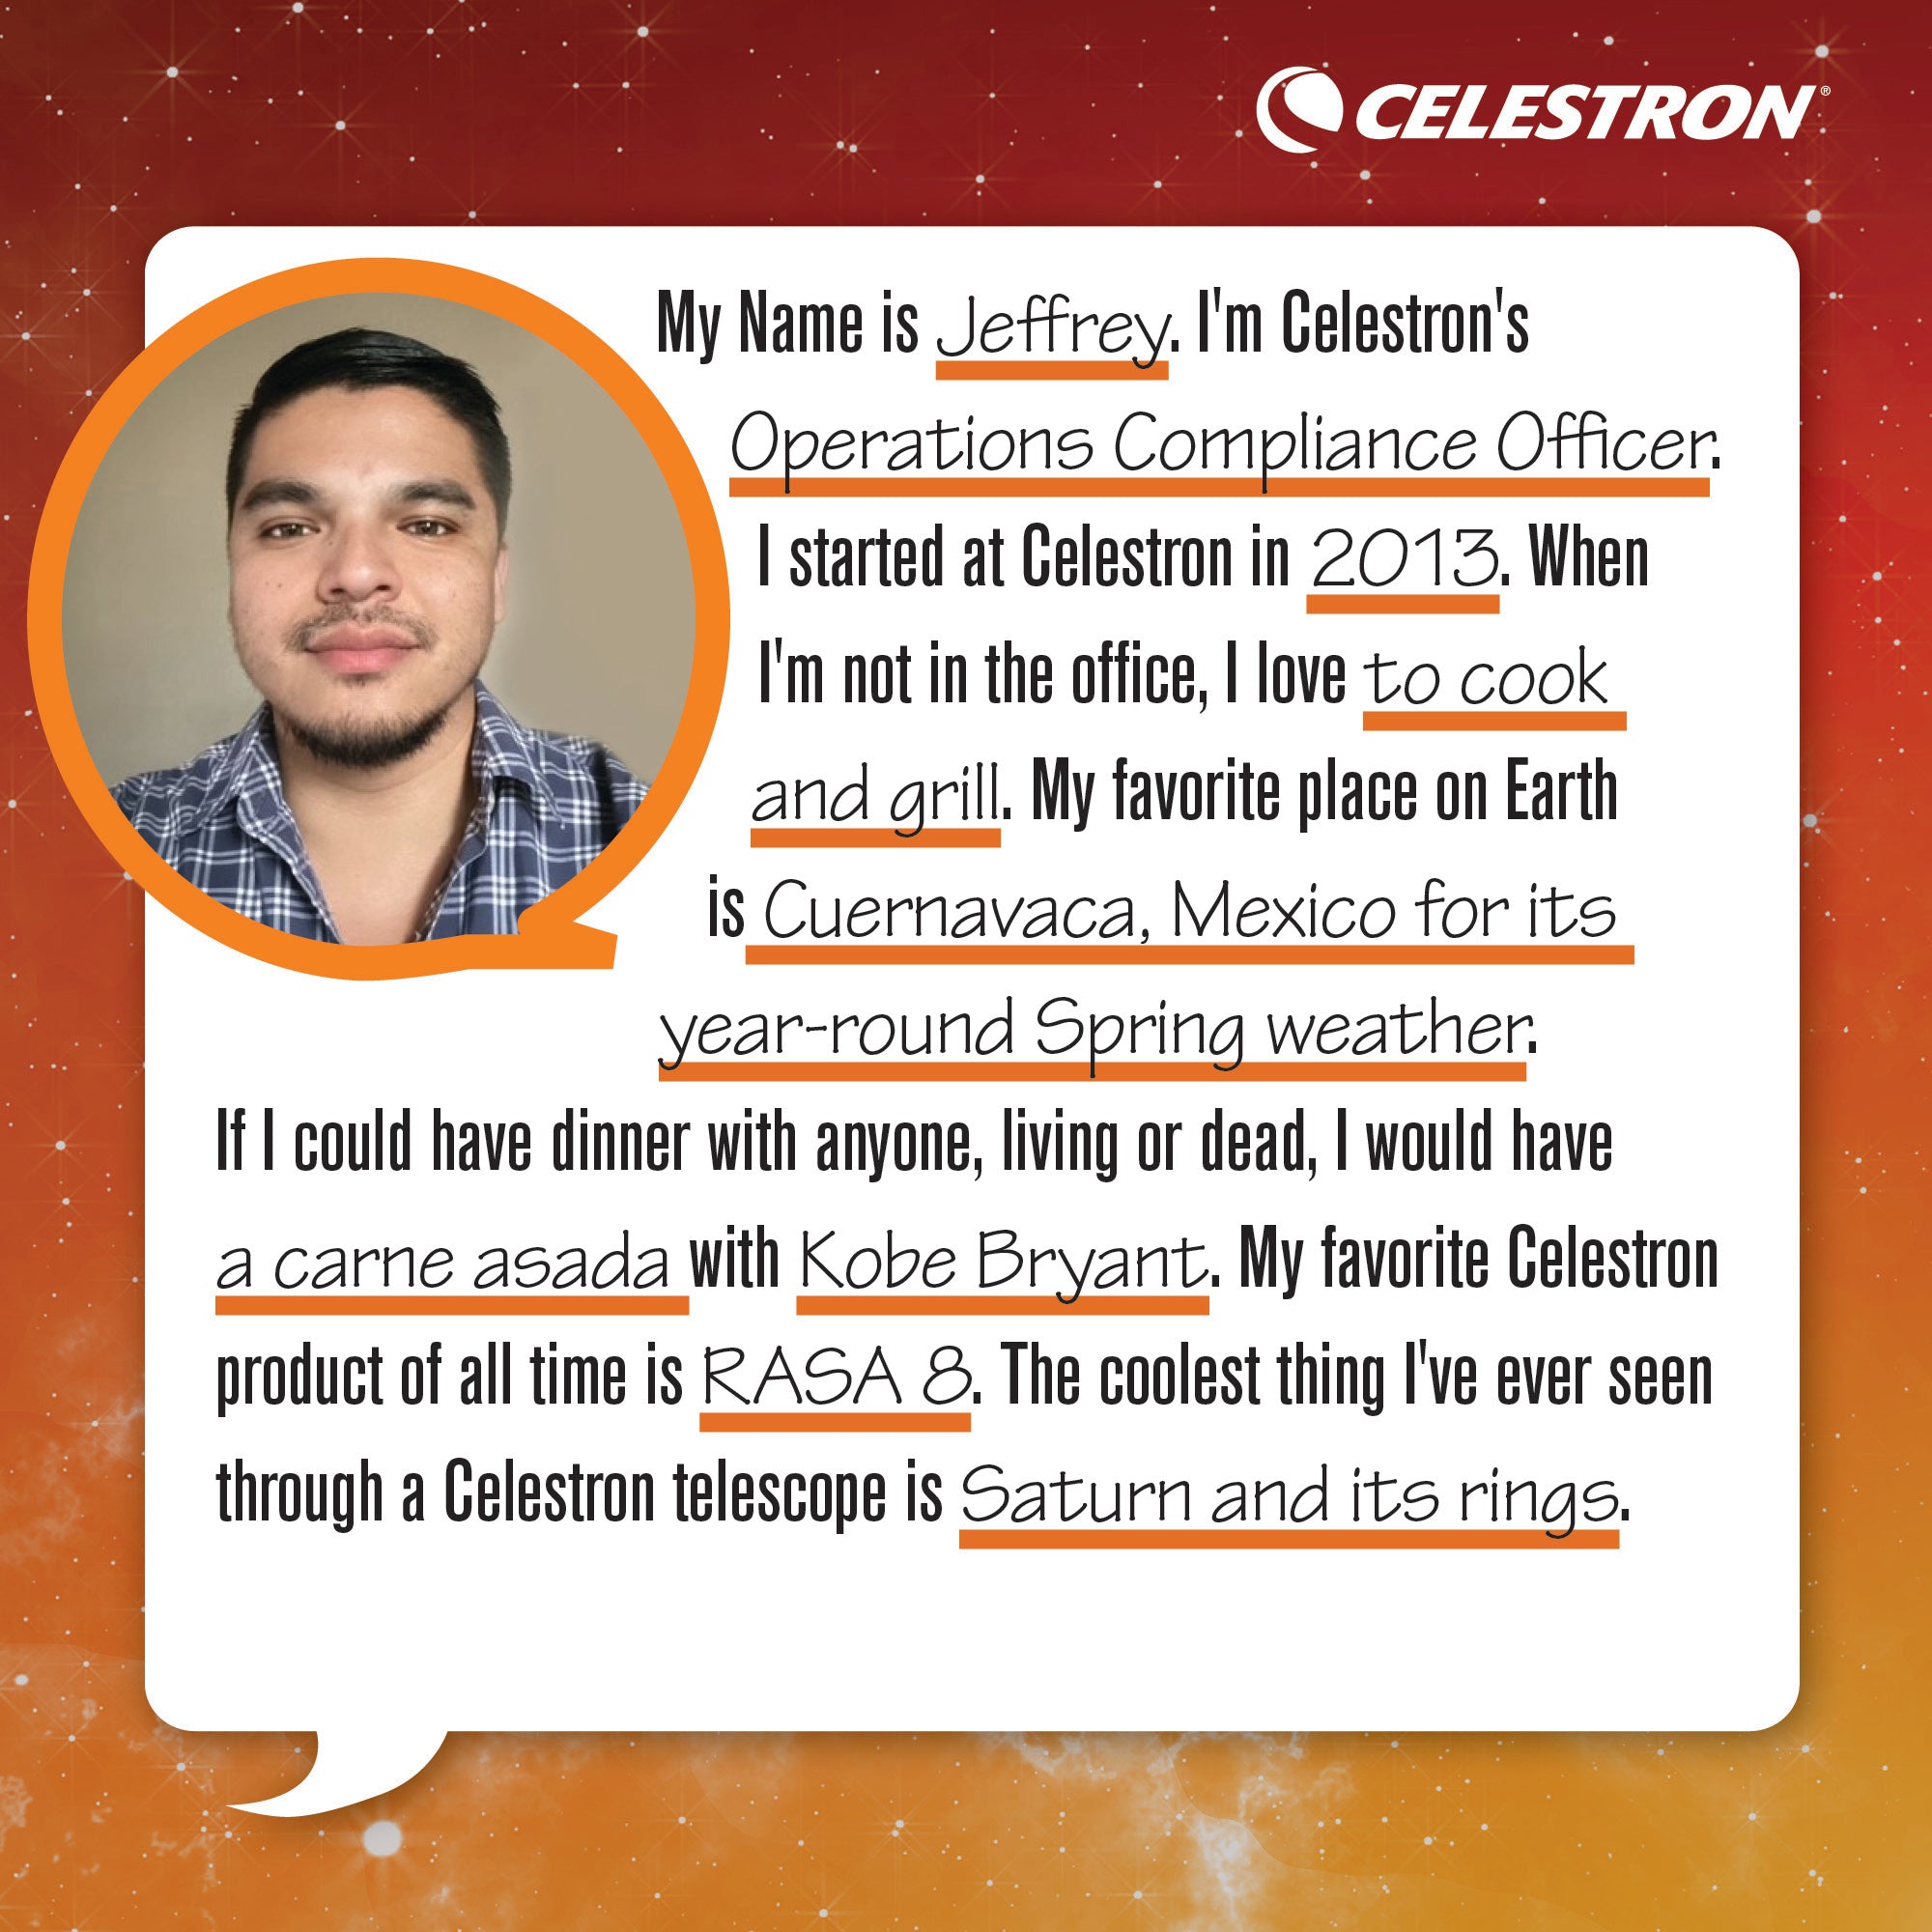 My name is Jeffrey. I'm Celestron's Operations Compliance Officer. I started at Celestron in 2013. When I'm not in the office, I love to cook and grill.  My favorite place on Earth is Cuernavaca, Mexico for its year-round Spring weather. If I could have dinner with anyone, living or dead, I would have a carne asada with Kobe Bryant. My favorite Celestron product of all time is the RASA 8. The coolest thing I've ever seen through a Celestron telescope is Saturn and its rings.